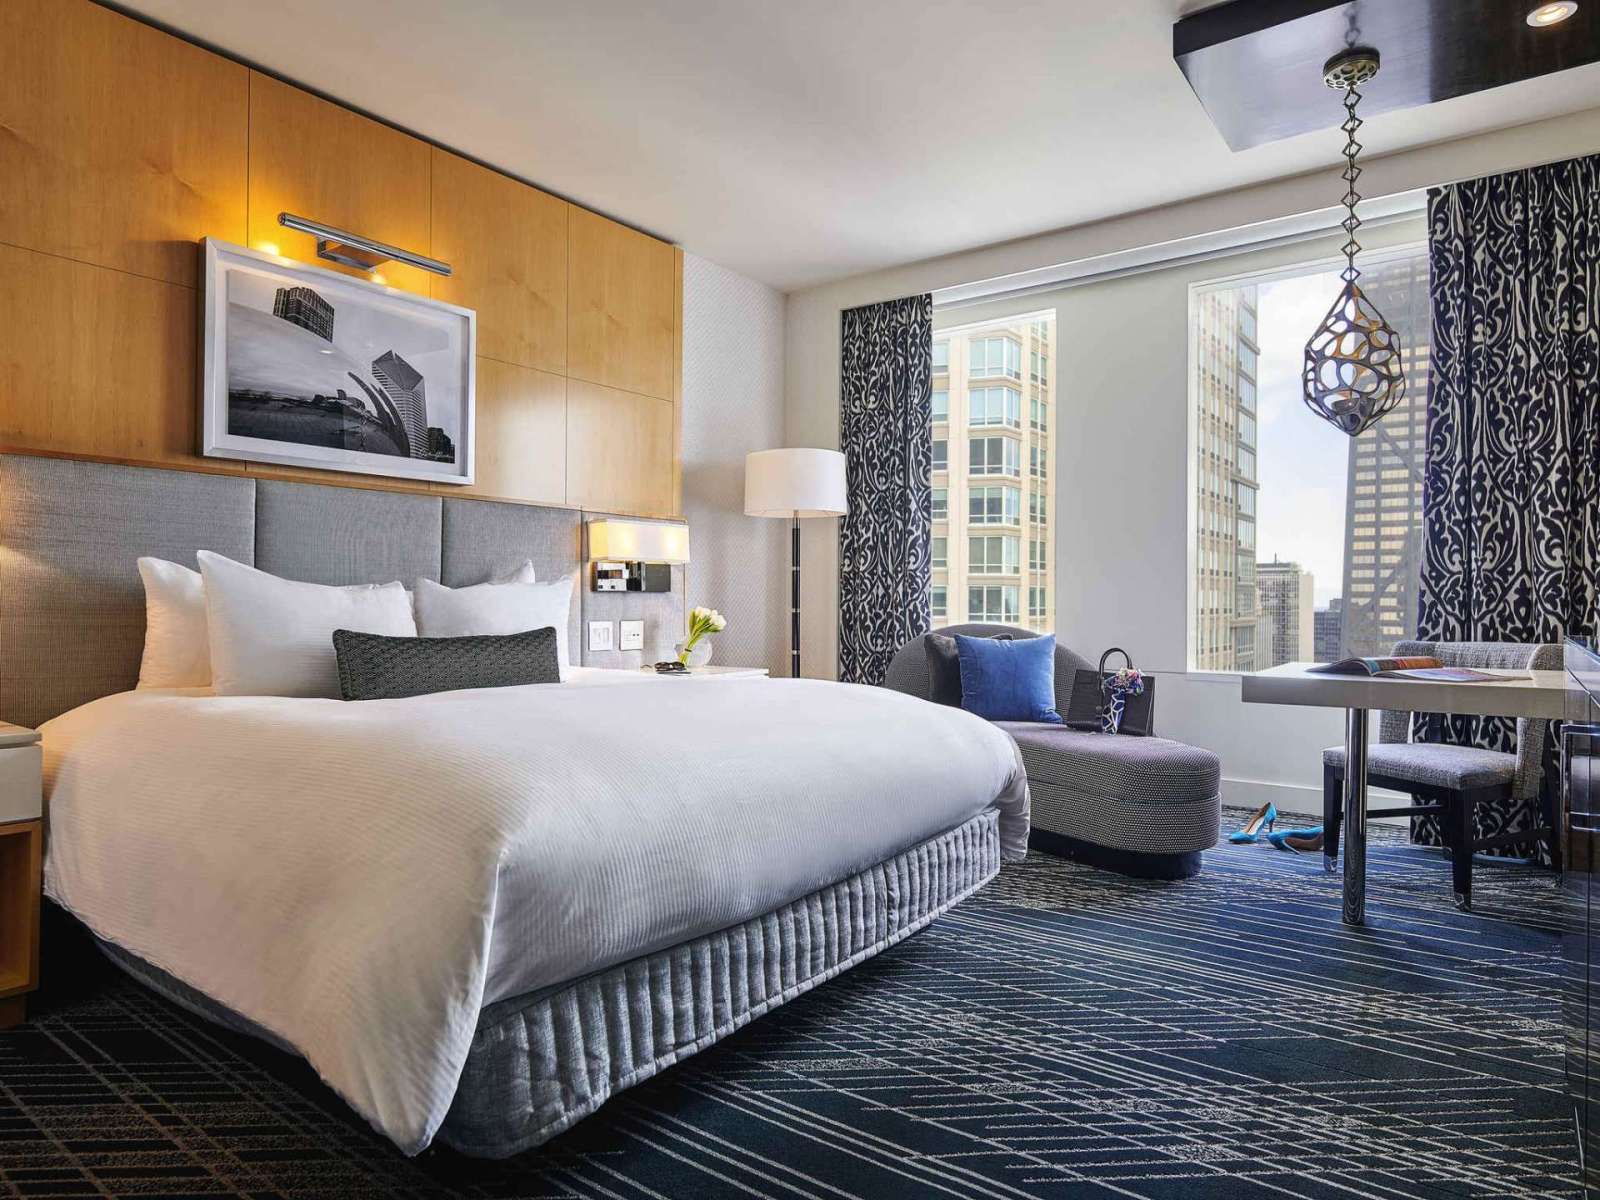 4th of July hotel deal sofitel guest room